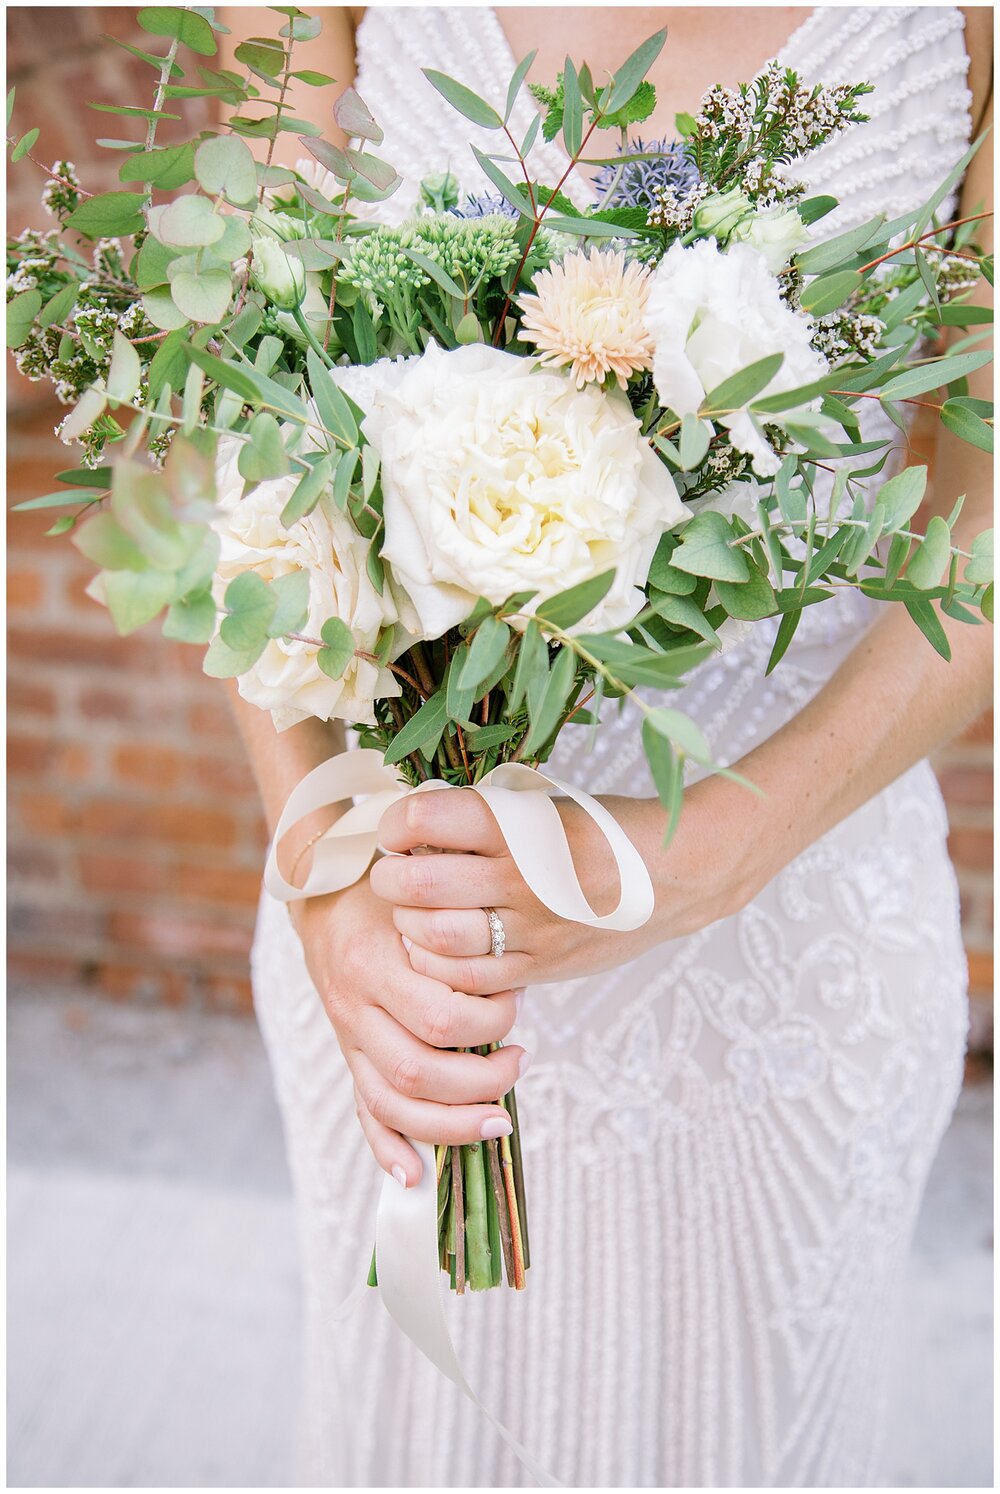  bride holding white and green bouquet, brooklyn wedding 